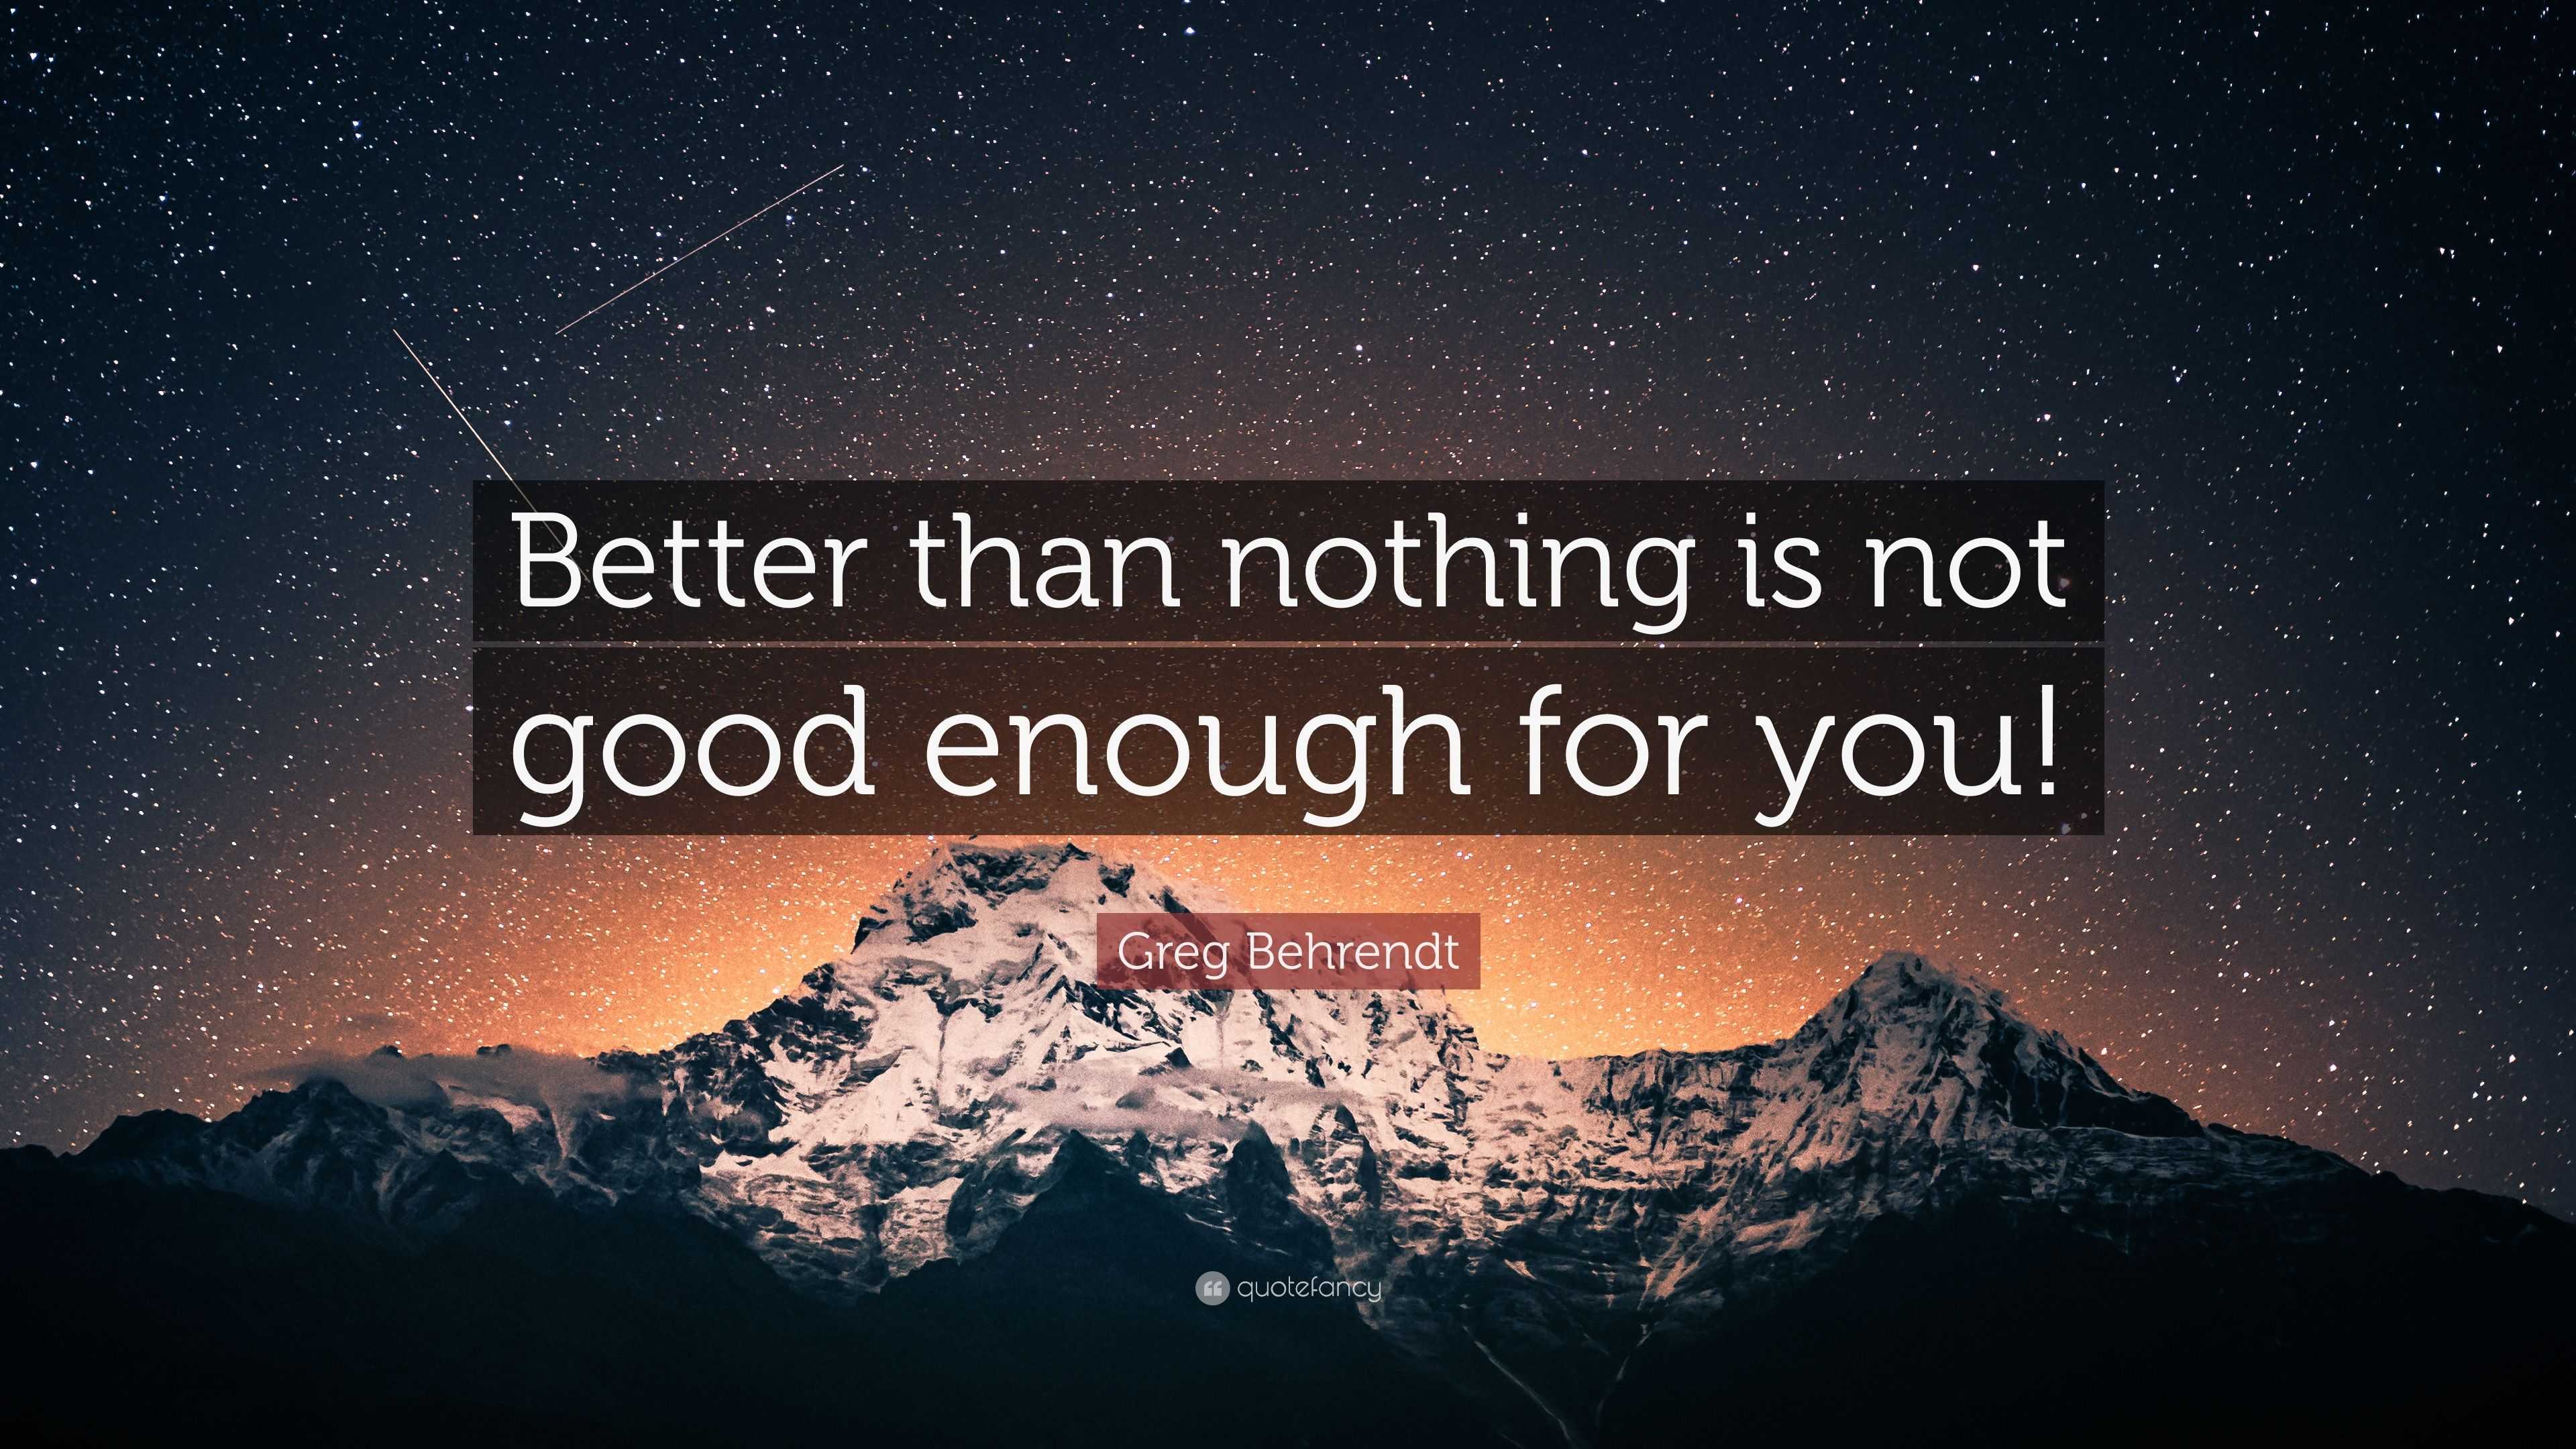 Greg Behrendt Quote Better Than Nothing Is Not Good Enough For You 7 Wallpapers Quotefancy